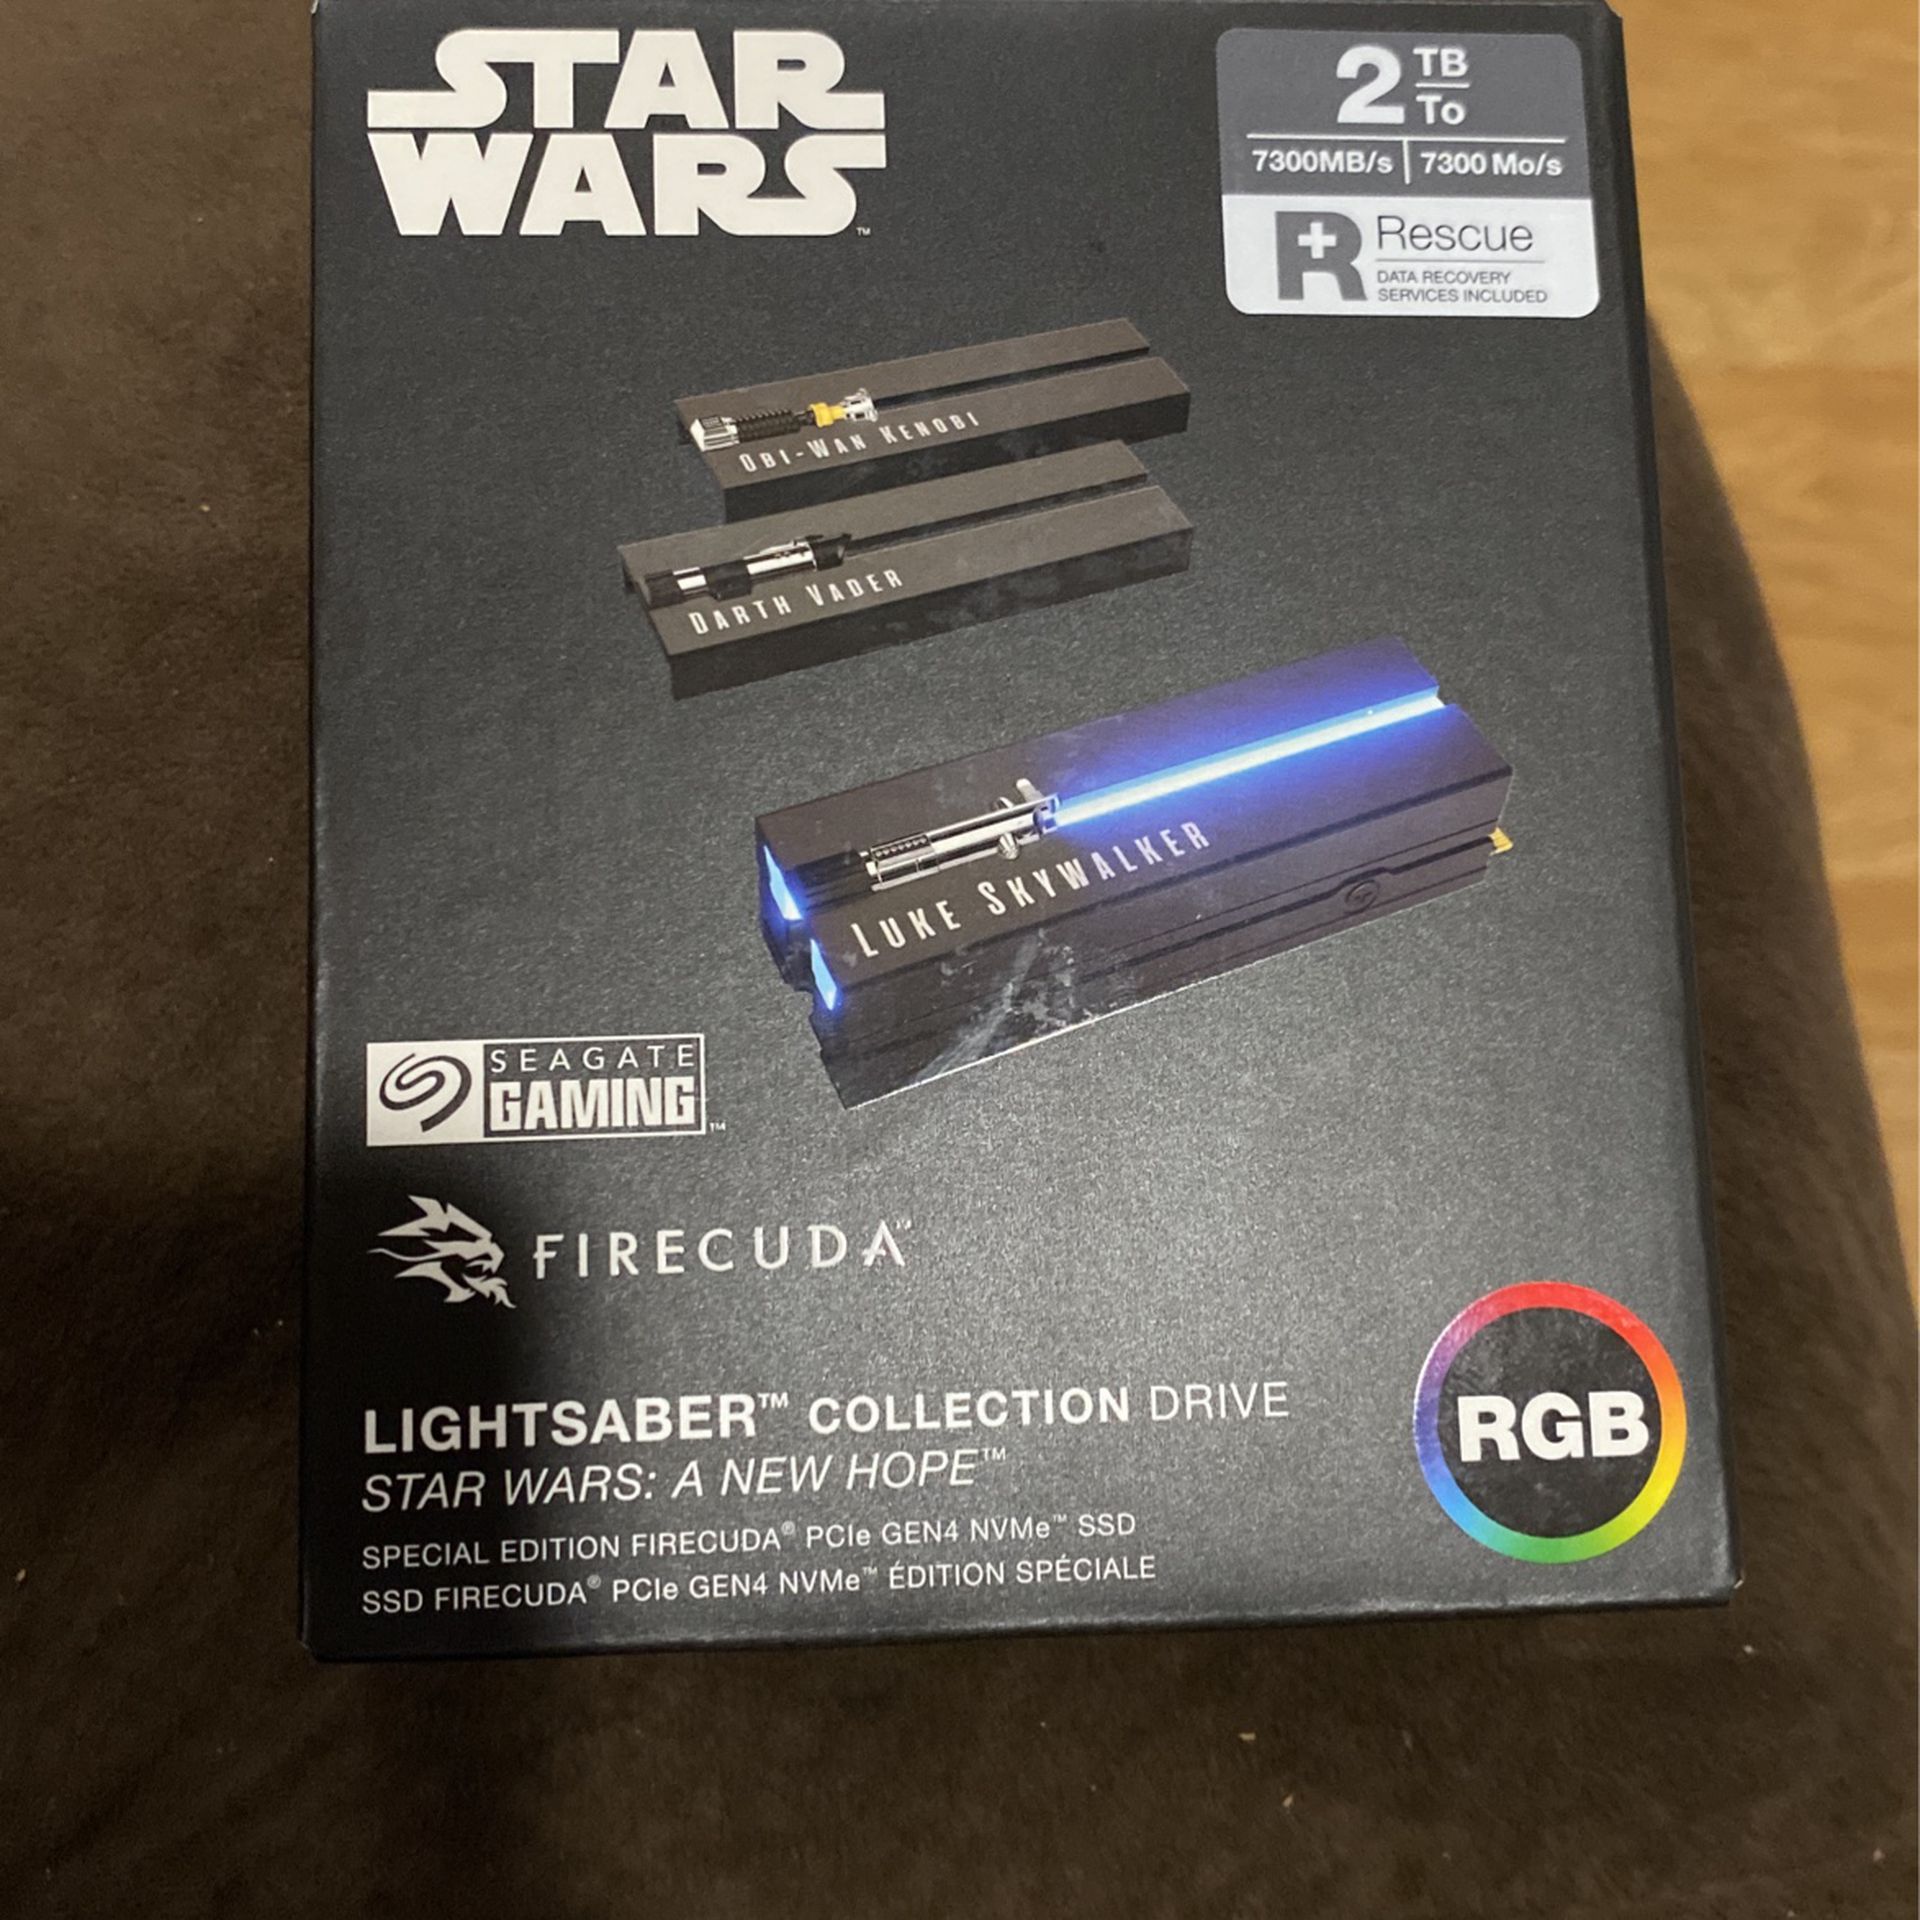 Seagate - Lightsaber FireCuda 2TB Internal SSD PCIe Gen 4 x4 NVMe with RGB LED Lightsabers (BEST PRICE)